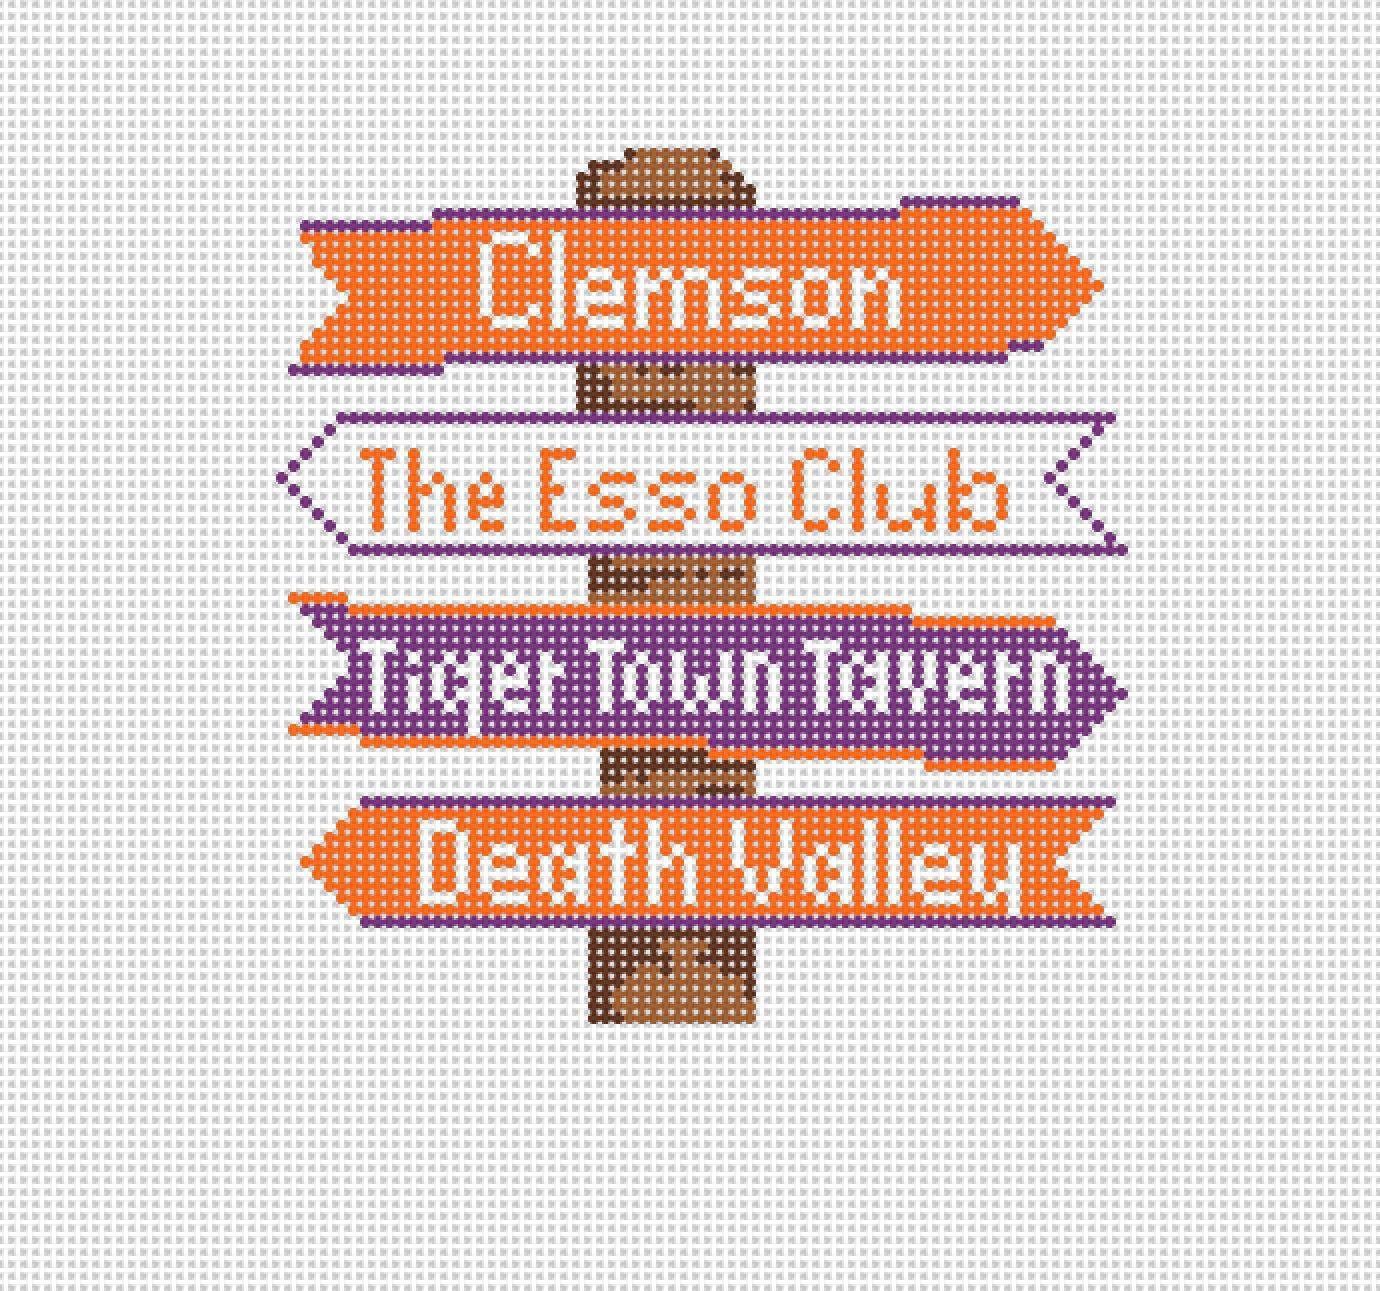 Clemson College Icon Destination Sign - Needlepoint by Laura